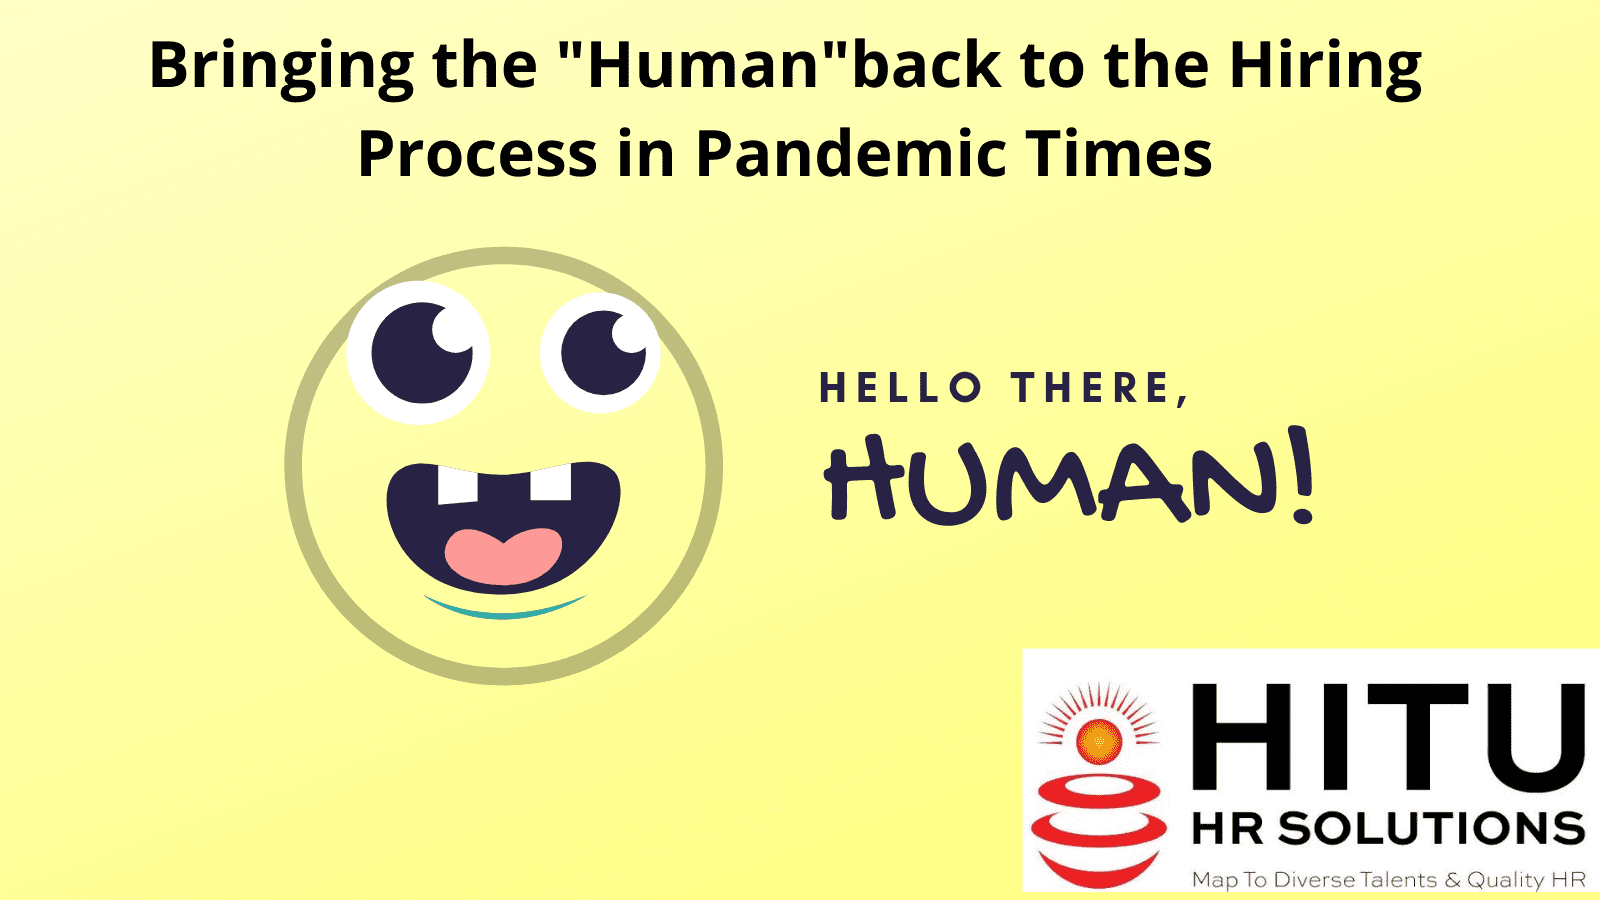 Bringing the 'Human' back to the Hiring Process in Pandemic Times